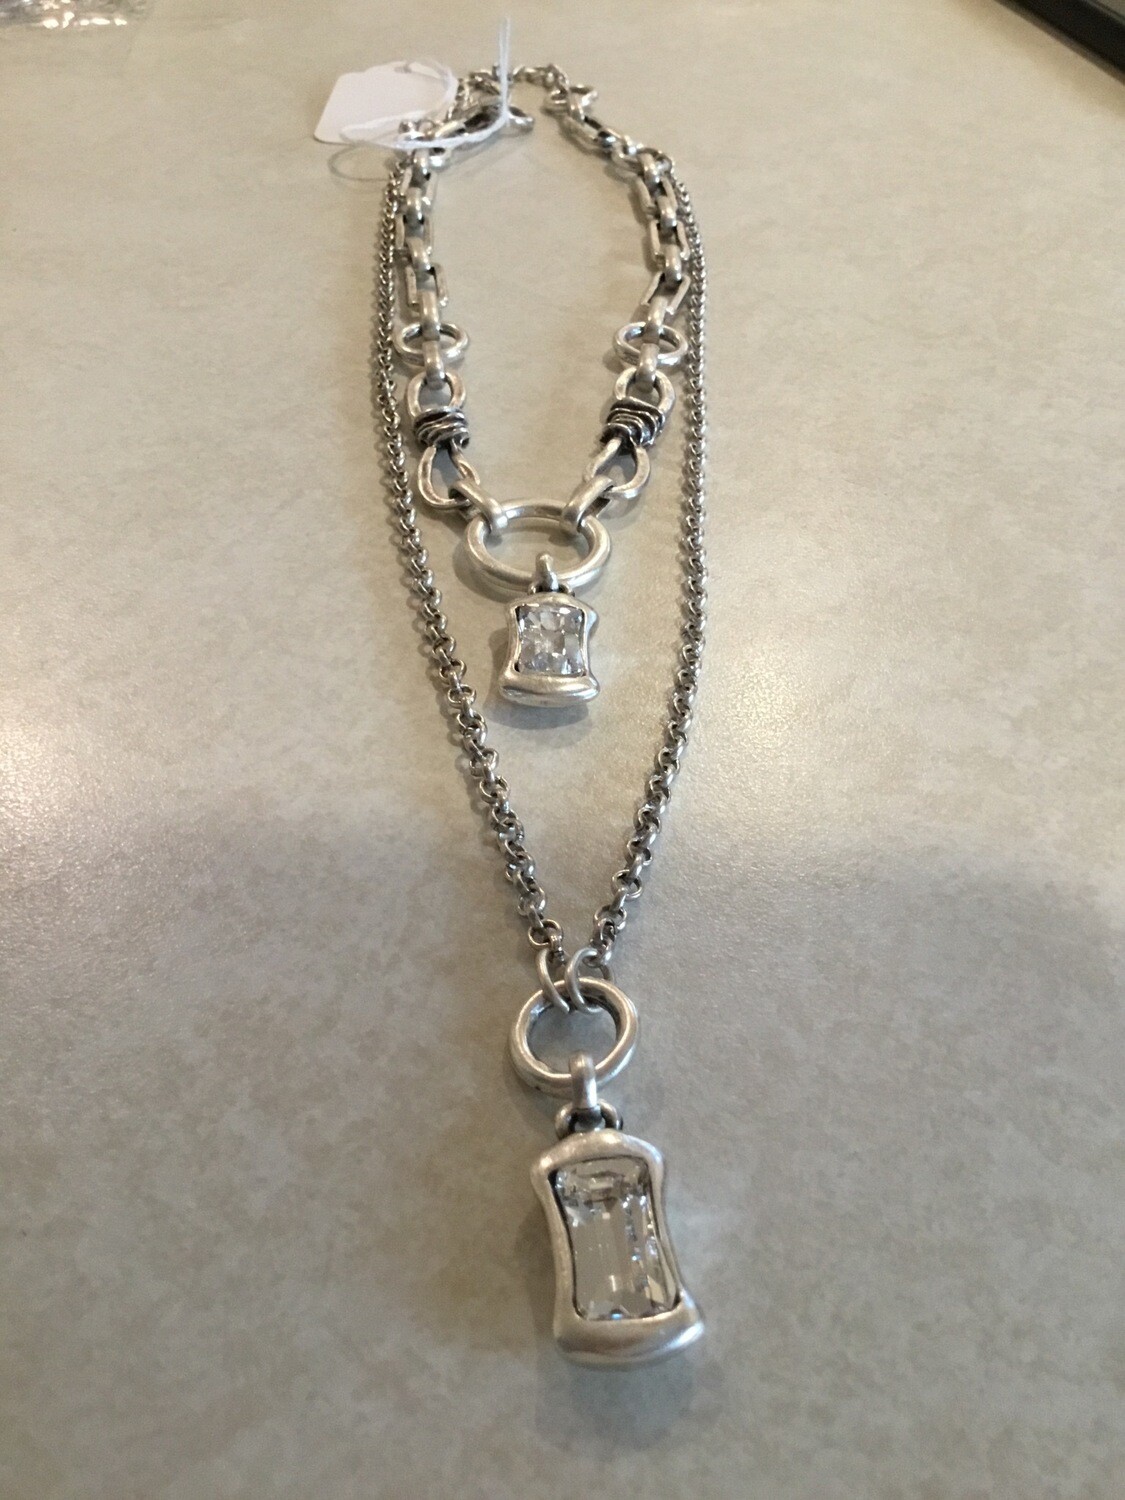 Handmade All Pewter Double Necklace With Crystals